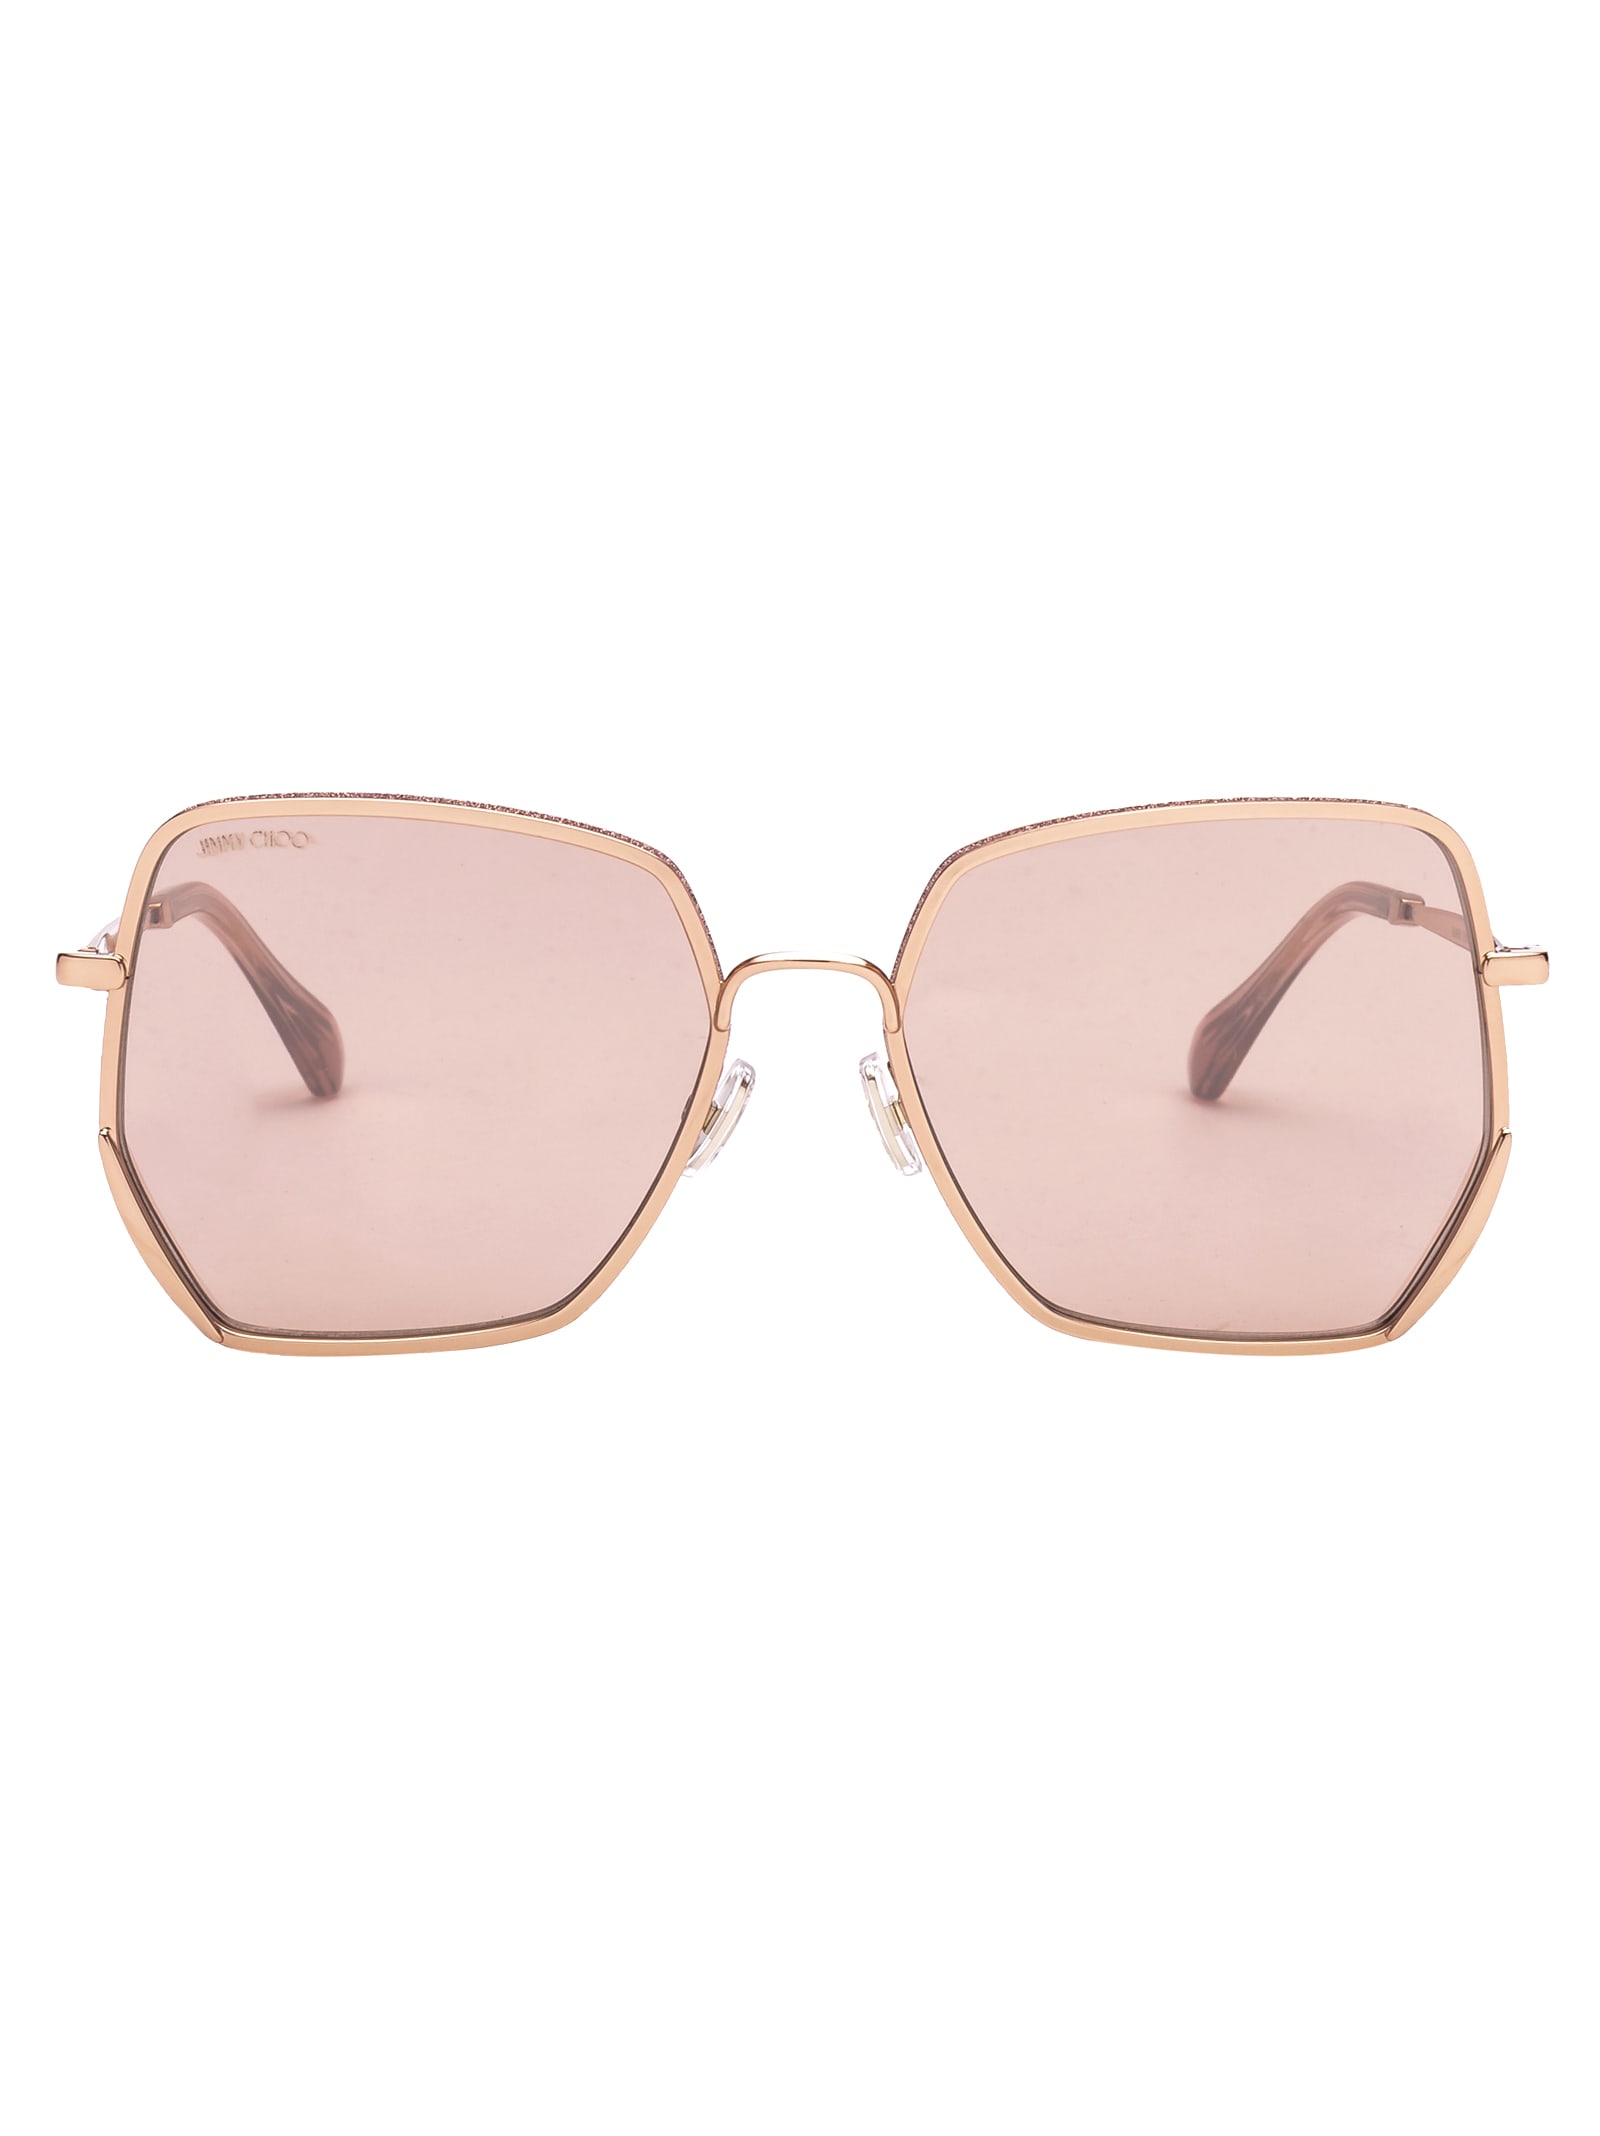 Jimmy Choo Sunglasses In S Gold Pink | ModeSens